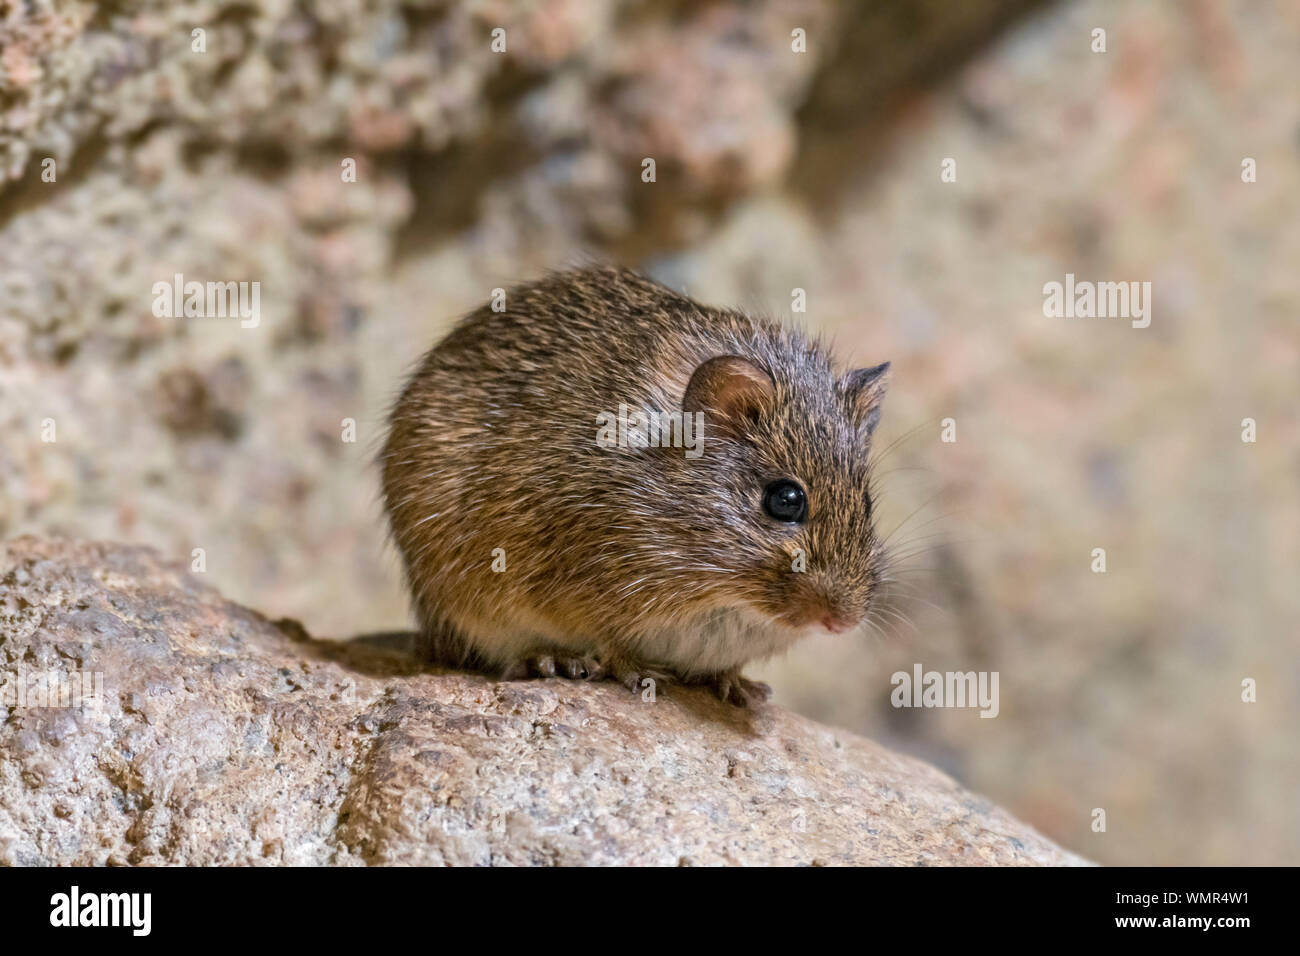 Hispid cotton rat (Sigmodon hispidus) rodent native to South America, Central America, and southern North America Stock Photo